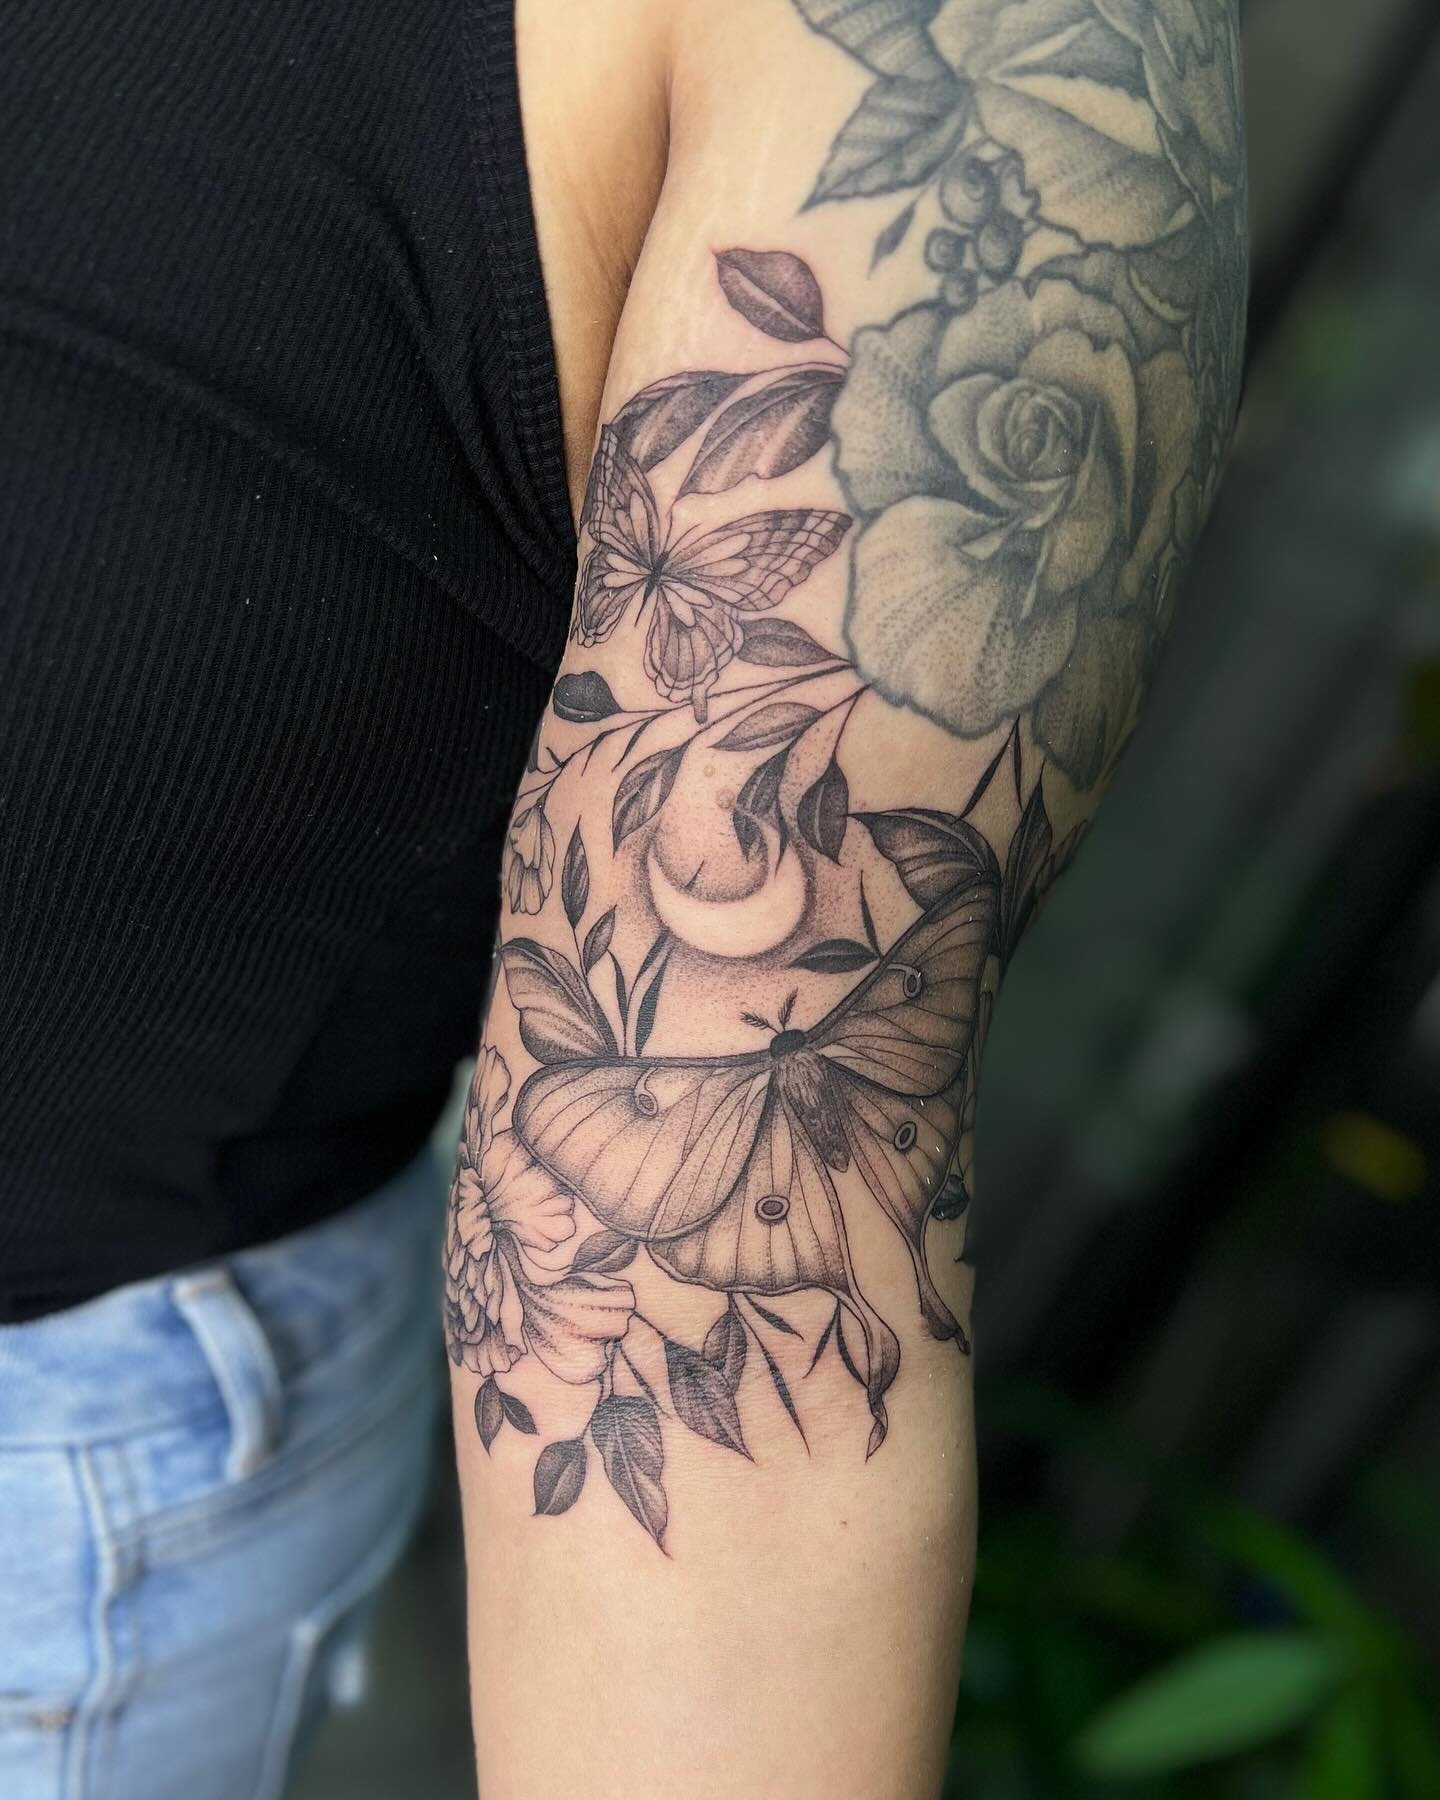 We finished off her upper half sleeve with a Luna moth and whimsical garden (existing work not done by me). Her last name is Luna so the moon and moth was a special touch for her❣️

Now booking for July-August. Use the link in my bio to my website to